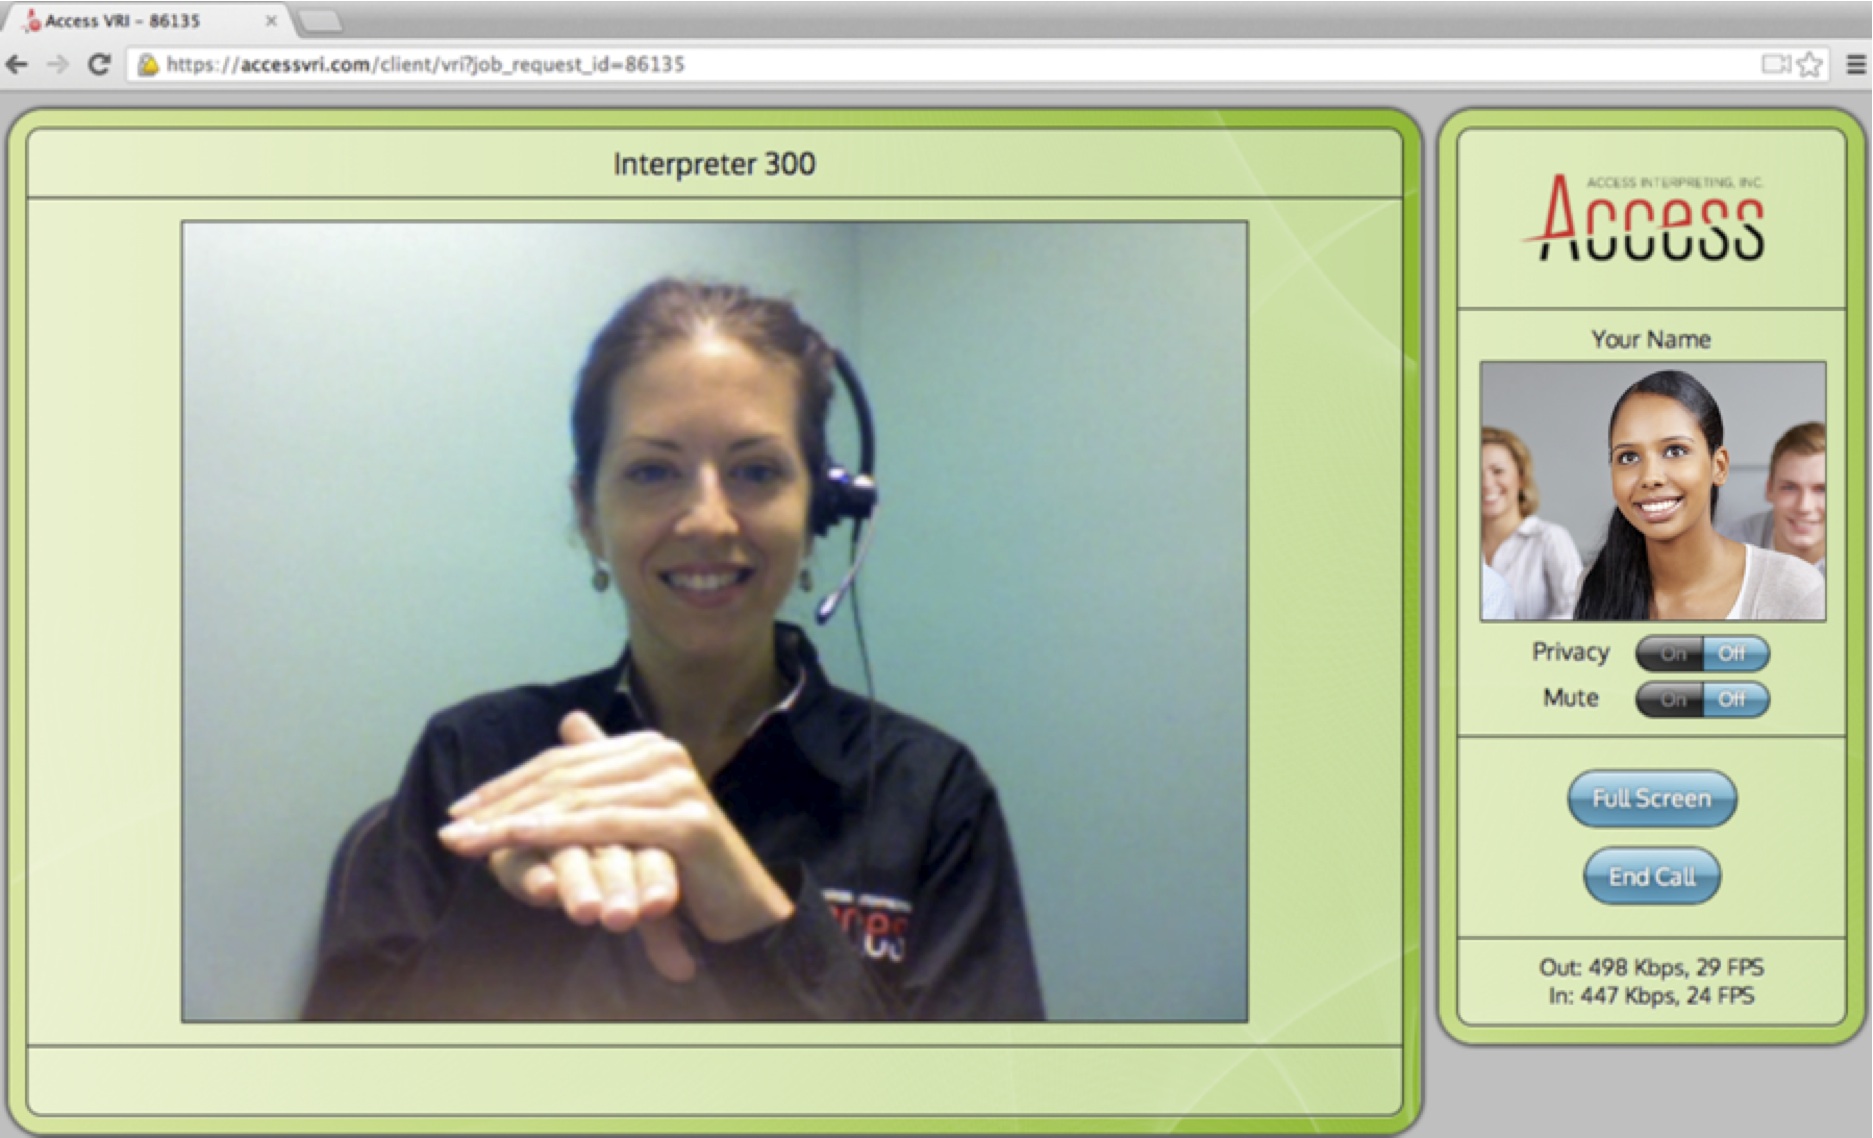 Access Interpreting, Inc. is proud to introduce its new Video Remote Interpreting service.